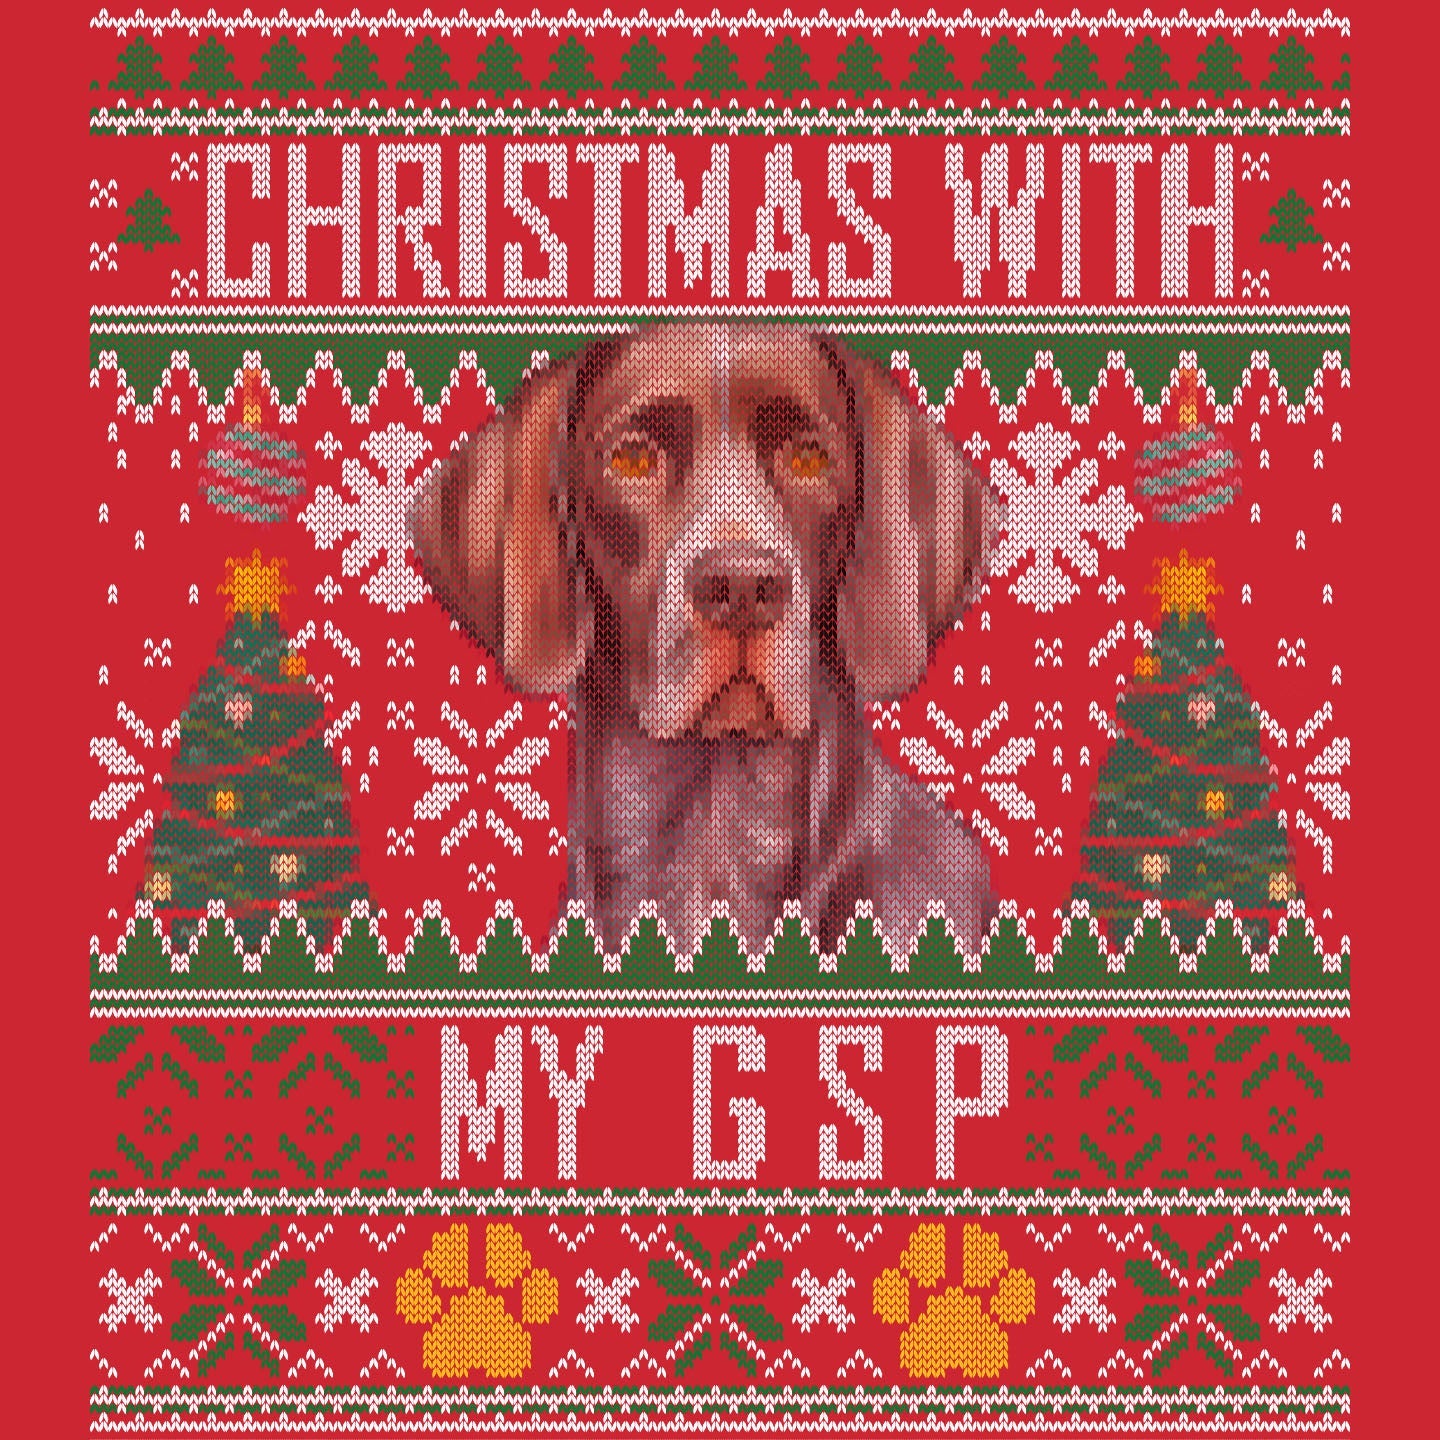 Ugly Sweater Christmas with My German Shorthaired Pointer - Adult Unisex Long Sleeve T-Shirt